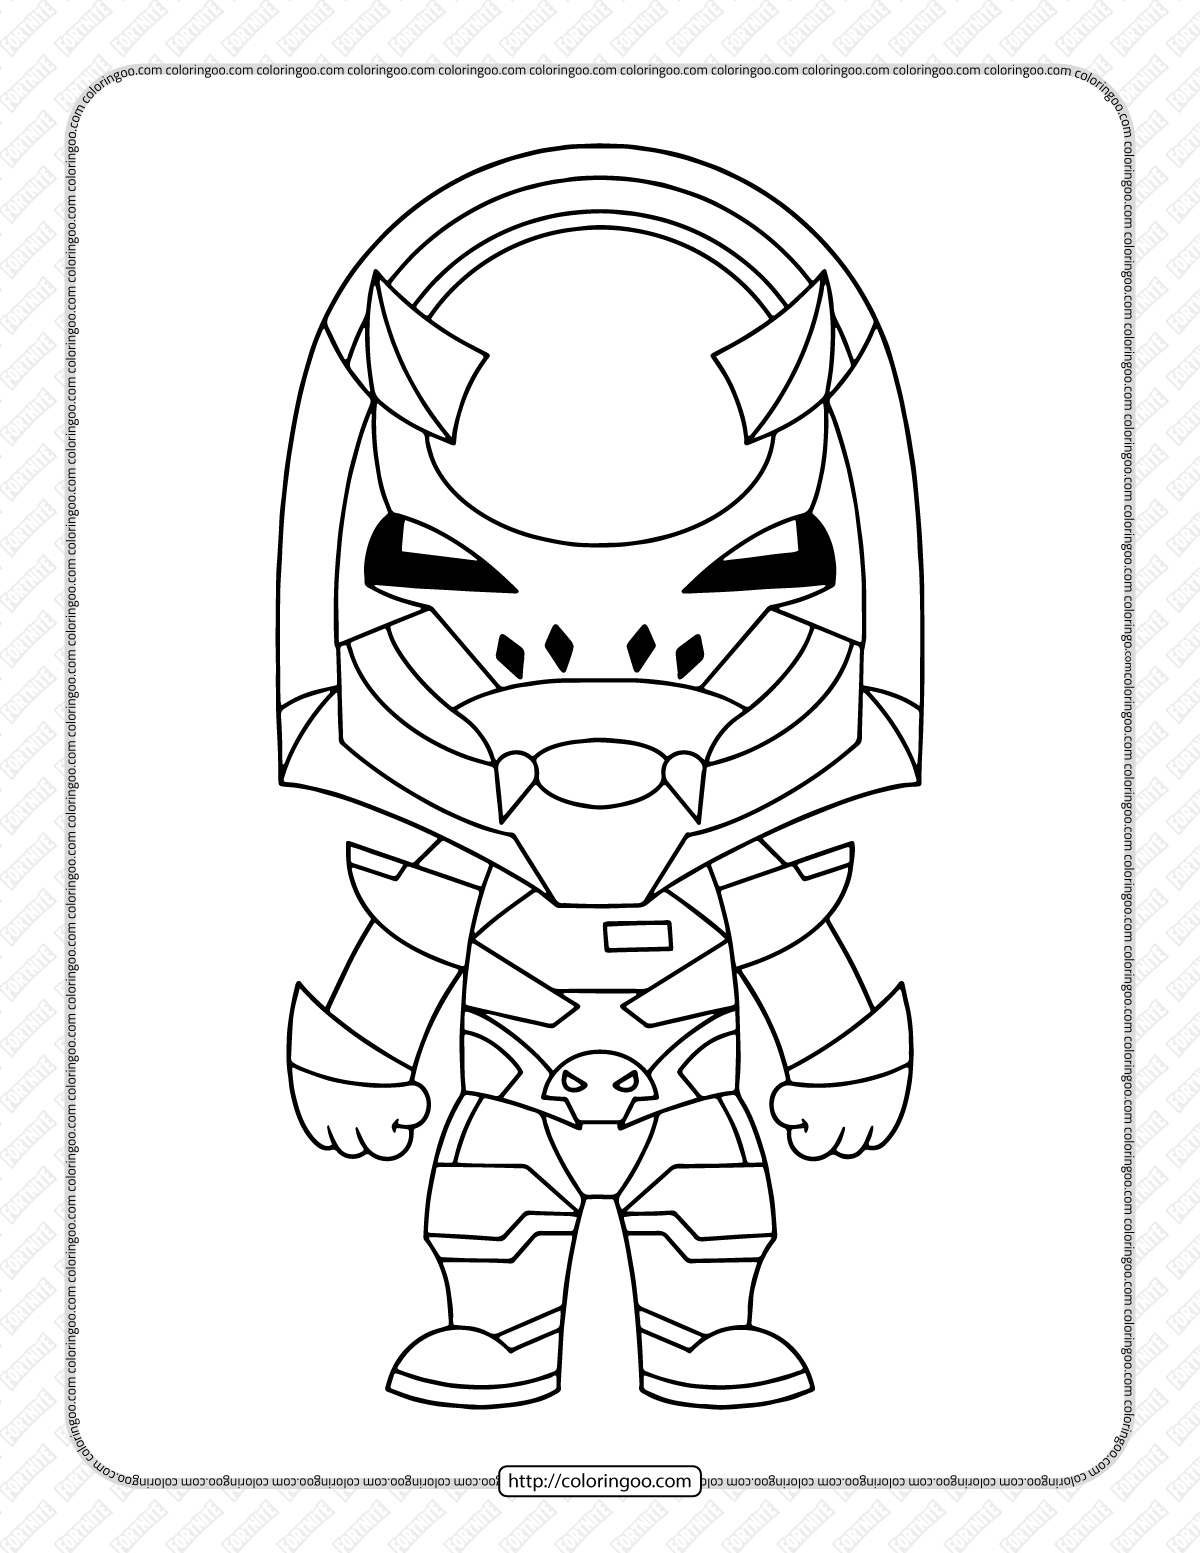 chibi fortnite coloring pages 05